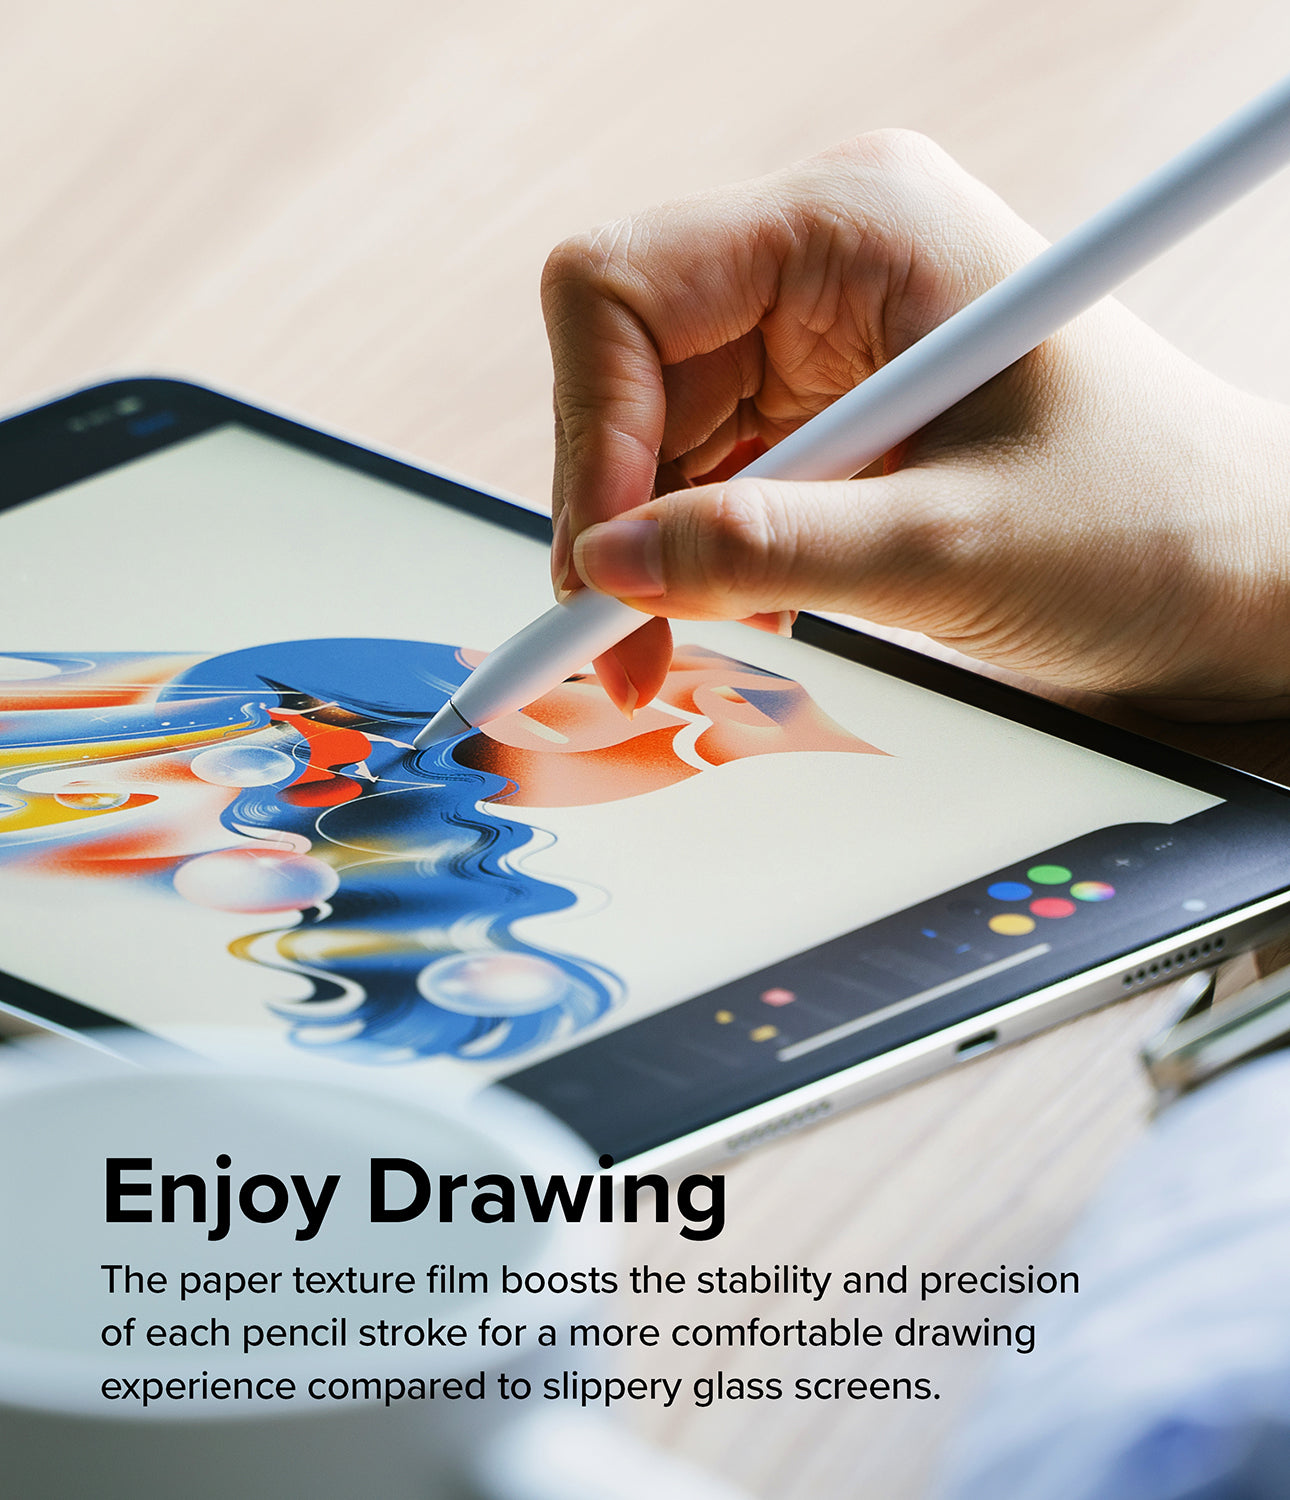 iPad Air 11" (M2) Screen Protector | Paper Touch Film - Soft - Enjoy Drawing. The paper texture film boosts the stability and precision of each pencil stroke for a more comfortable drawing experience compared to slippery glass screens.